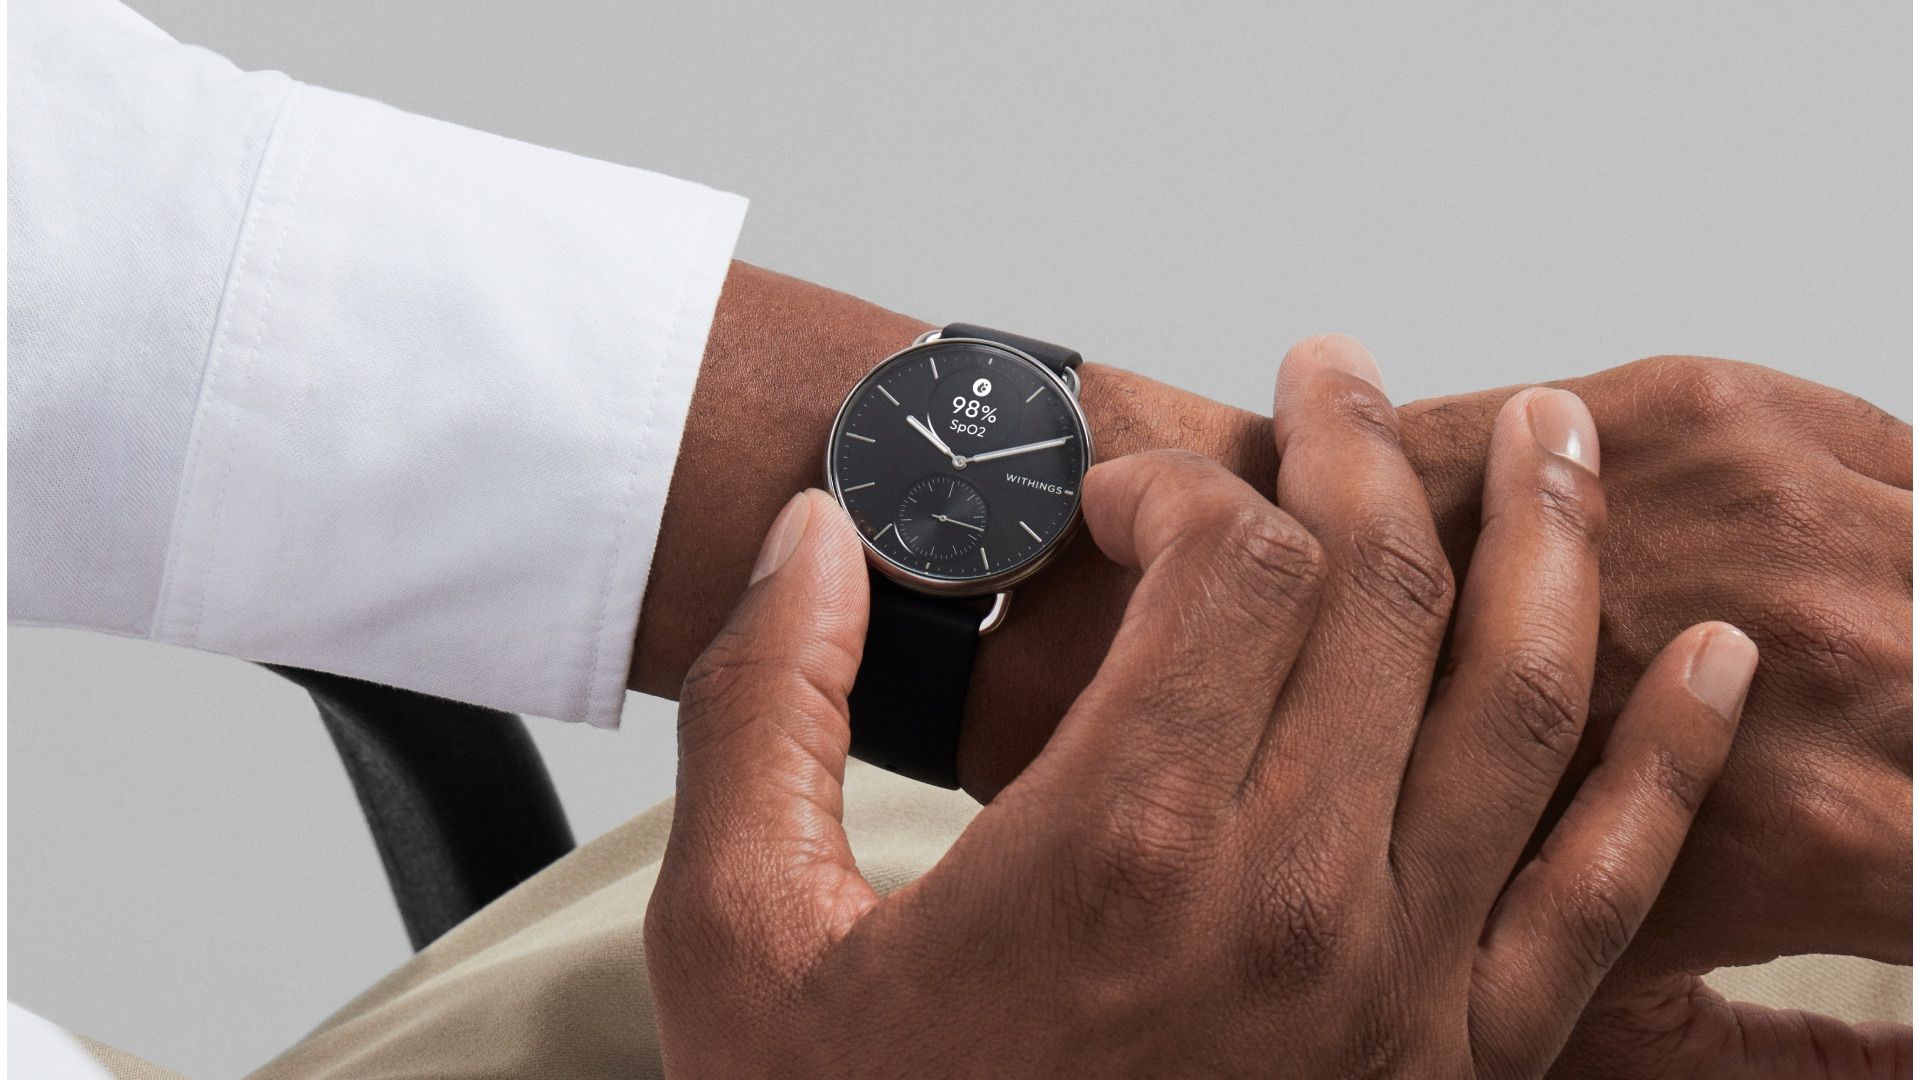 Withings ScanWatch 2 makes all the right upgrades over its predecessor